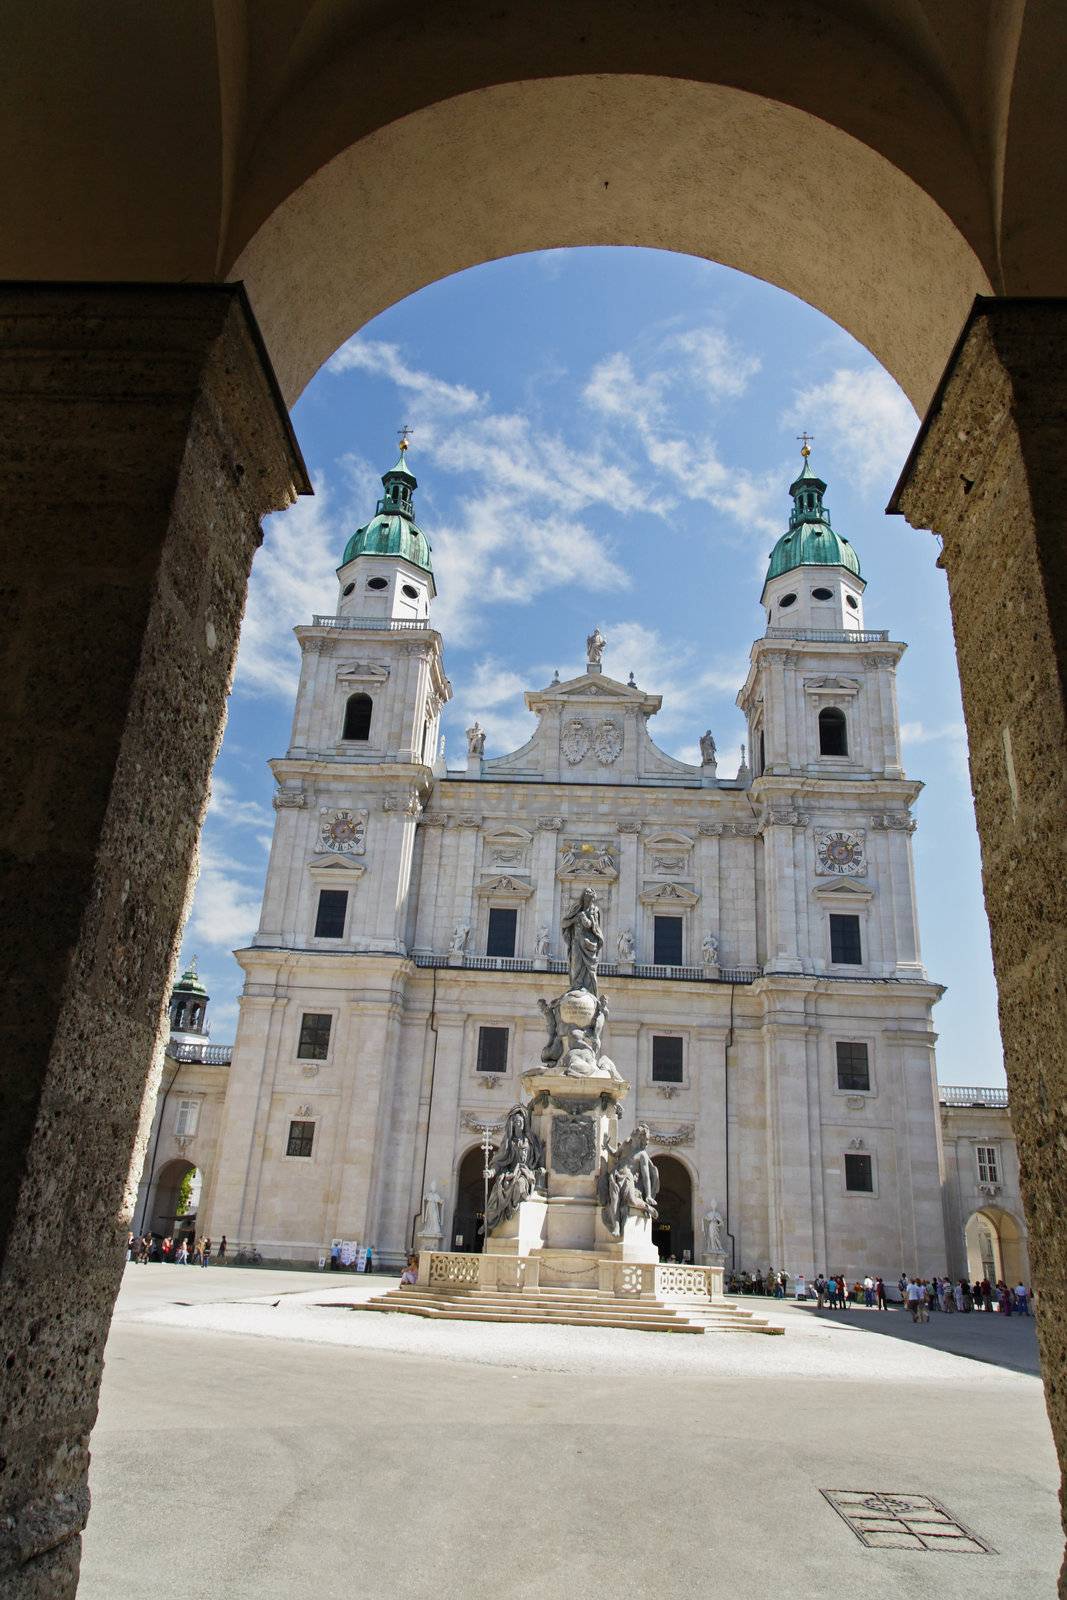 The Dome Cathedral in City Center of Salzburg, Austria